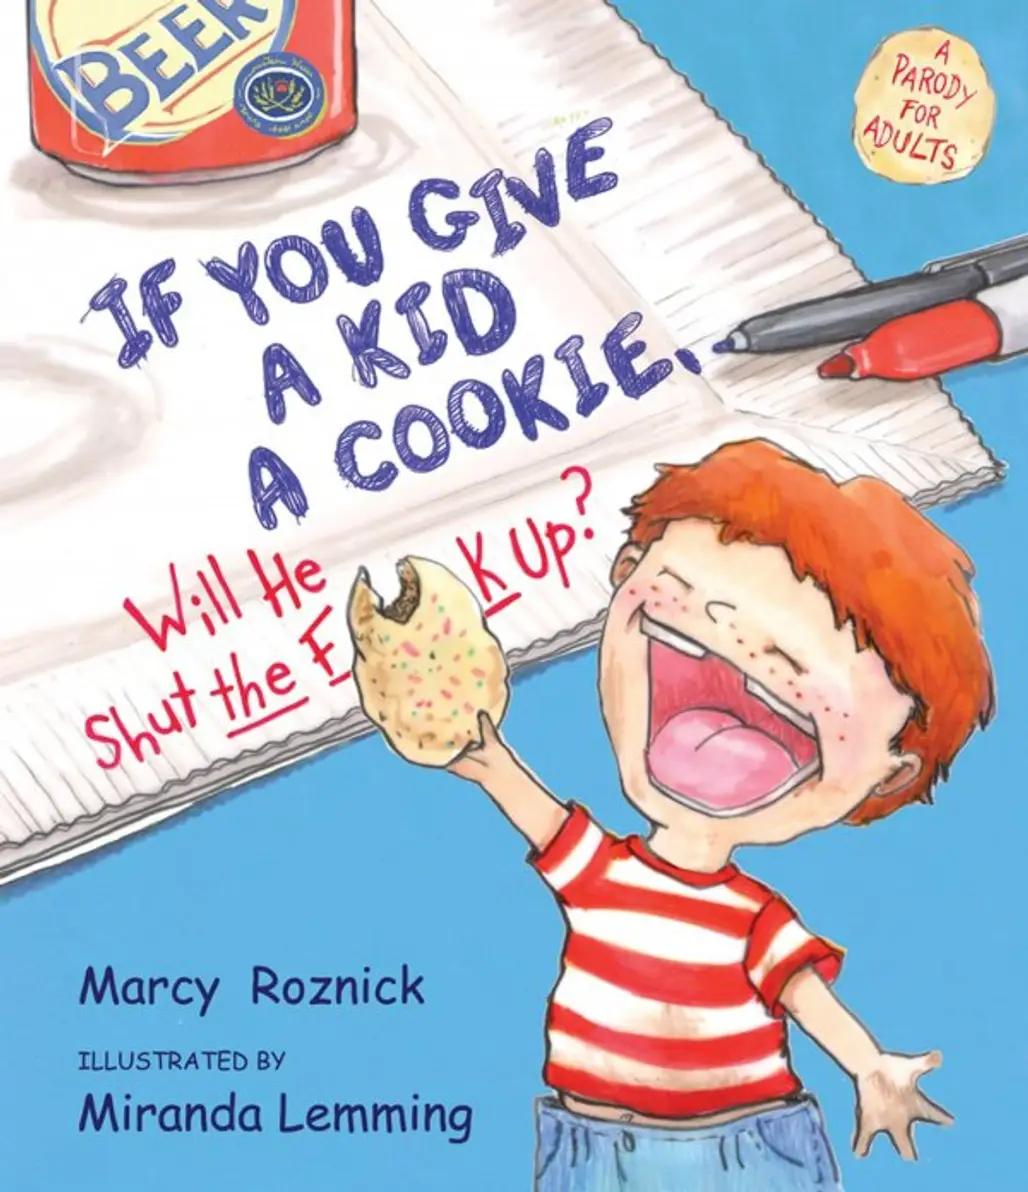 If You Give a Kid a Cookie, Will He Shut the F up?: a Parody for Adults by Marcy Roznick